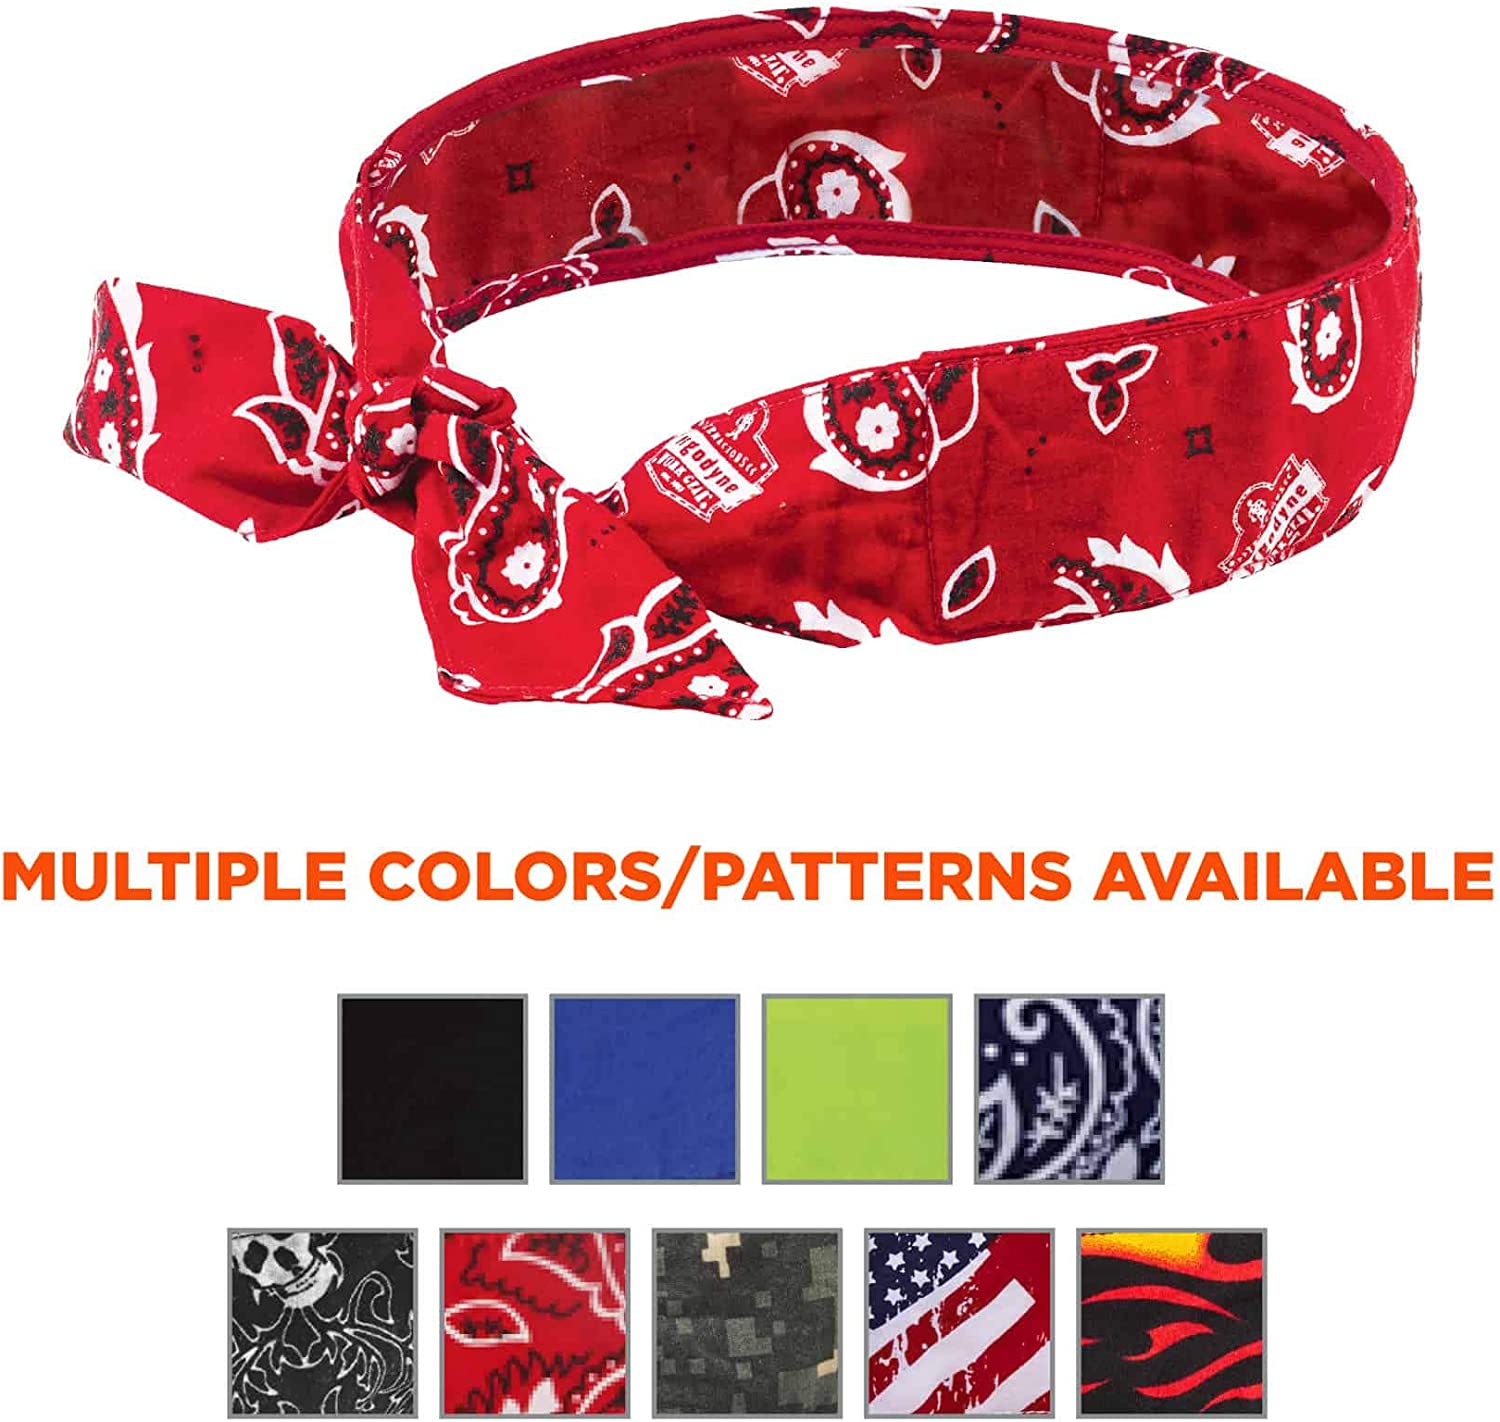 Ergodyne Chill Its 6700 Cooling Bandana, Red Western, Evaporative Polymer Crystals For Cooling Relief, Tie For Adjustable Fit